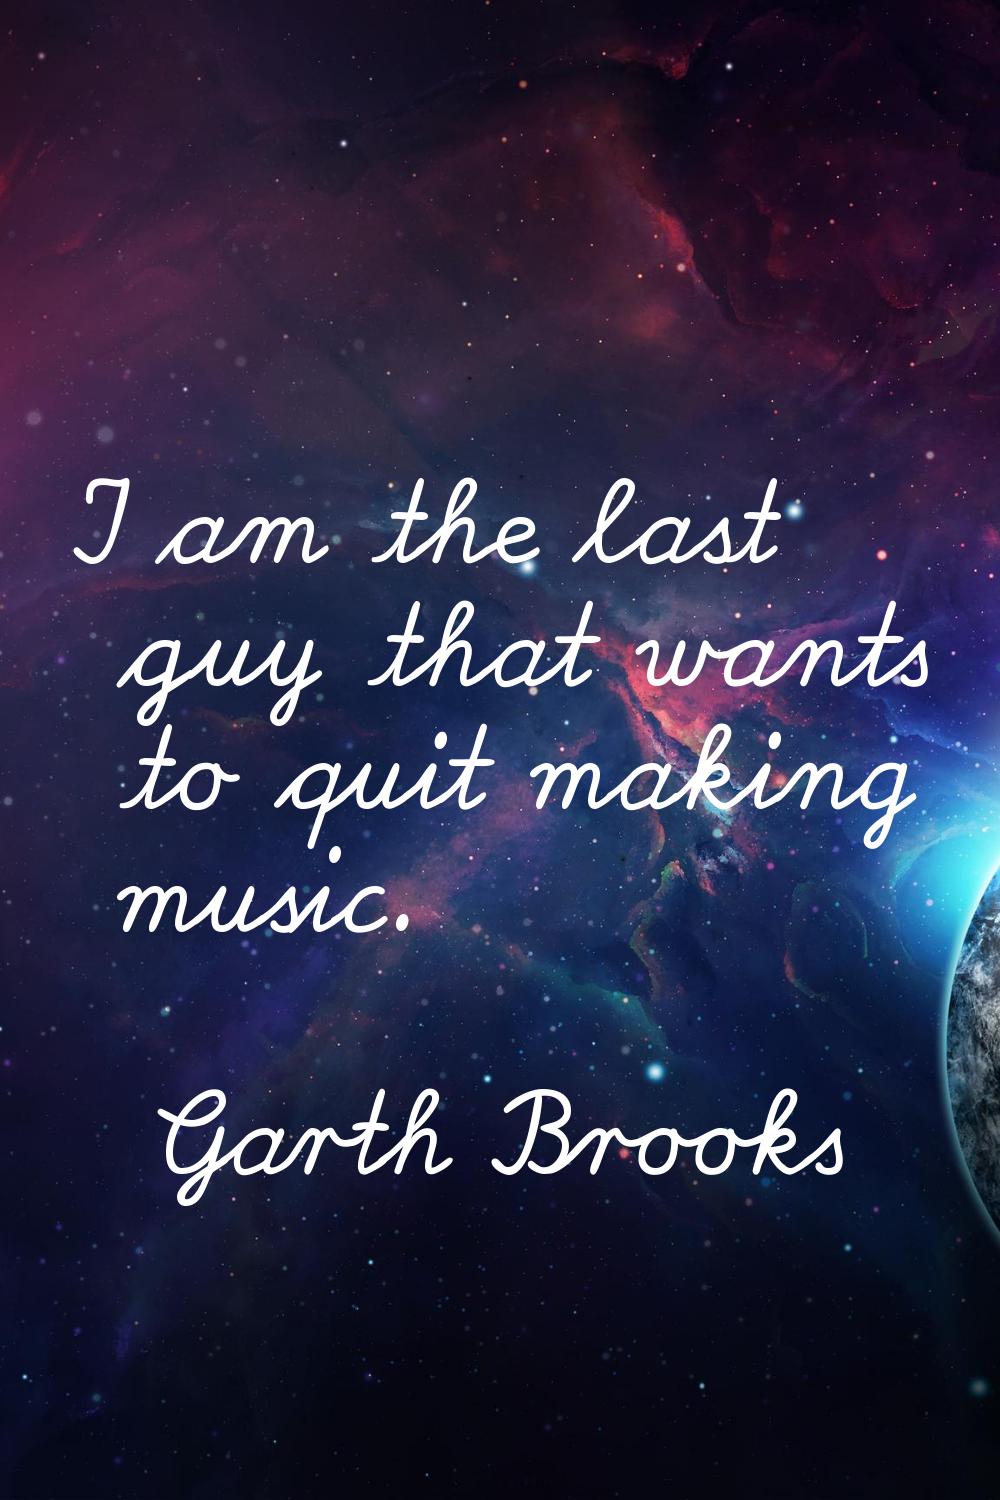 I am the last guy that wants to quit making music.